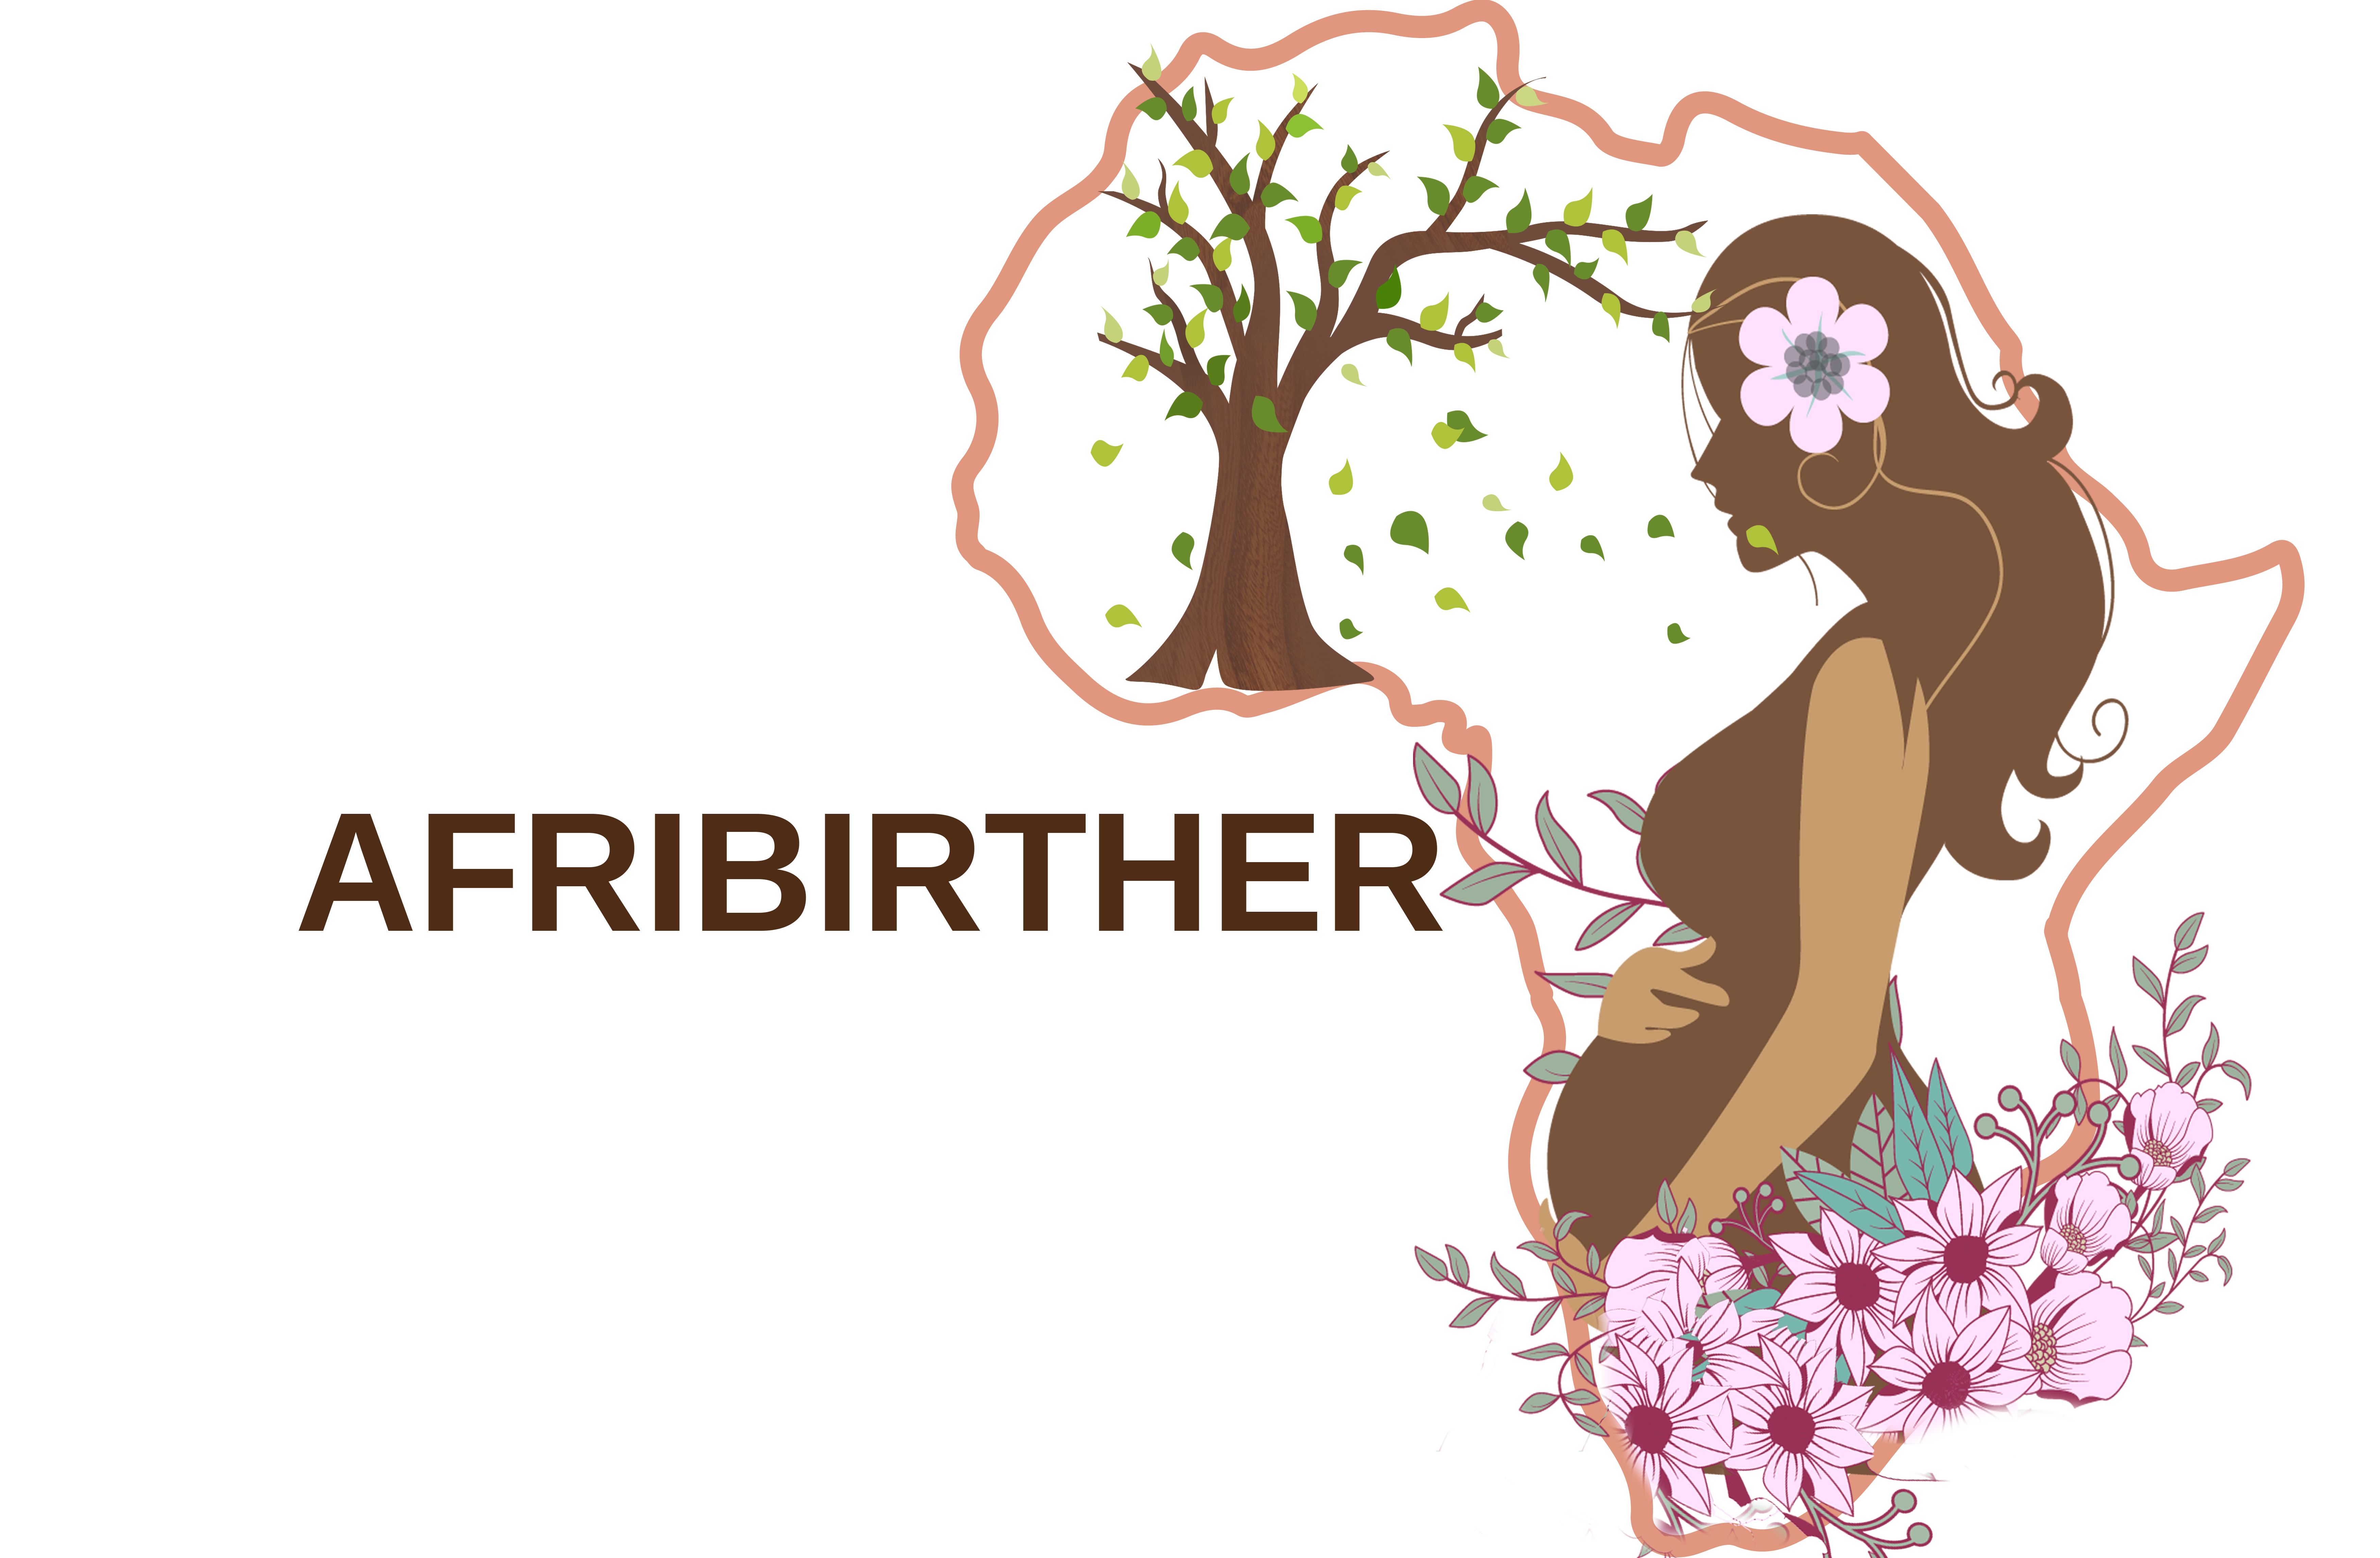 Afribither